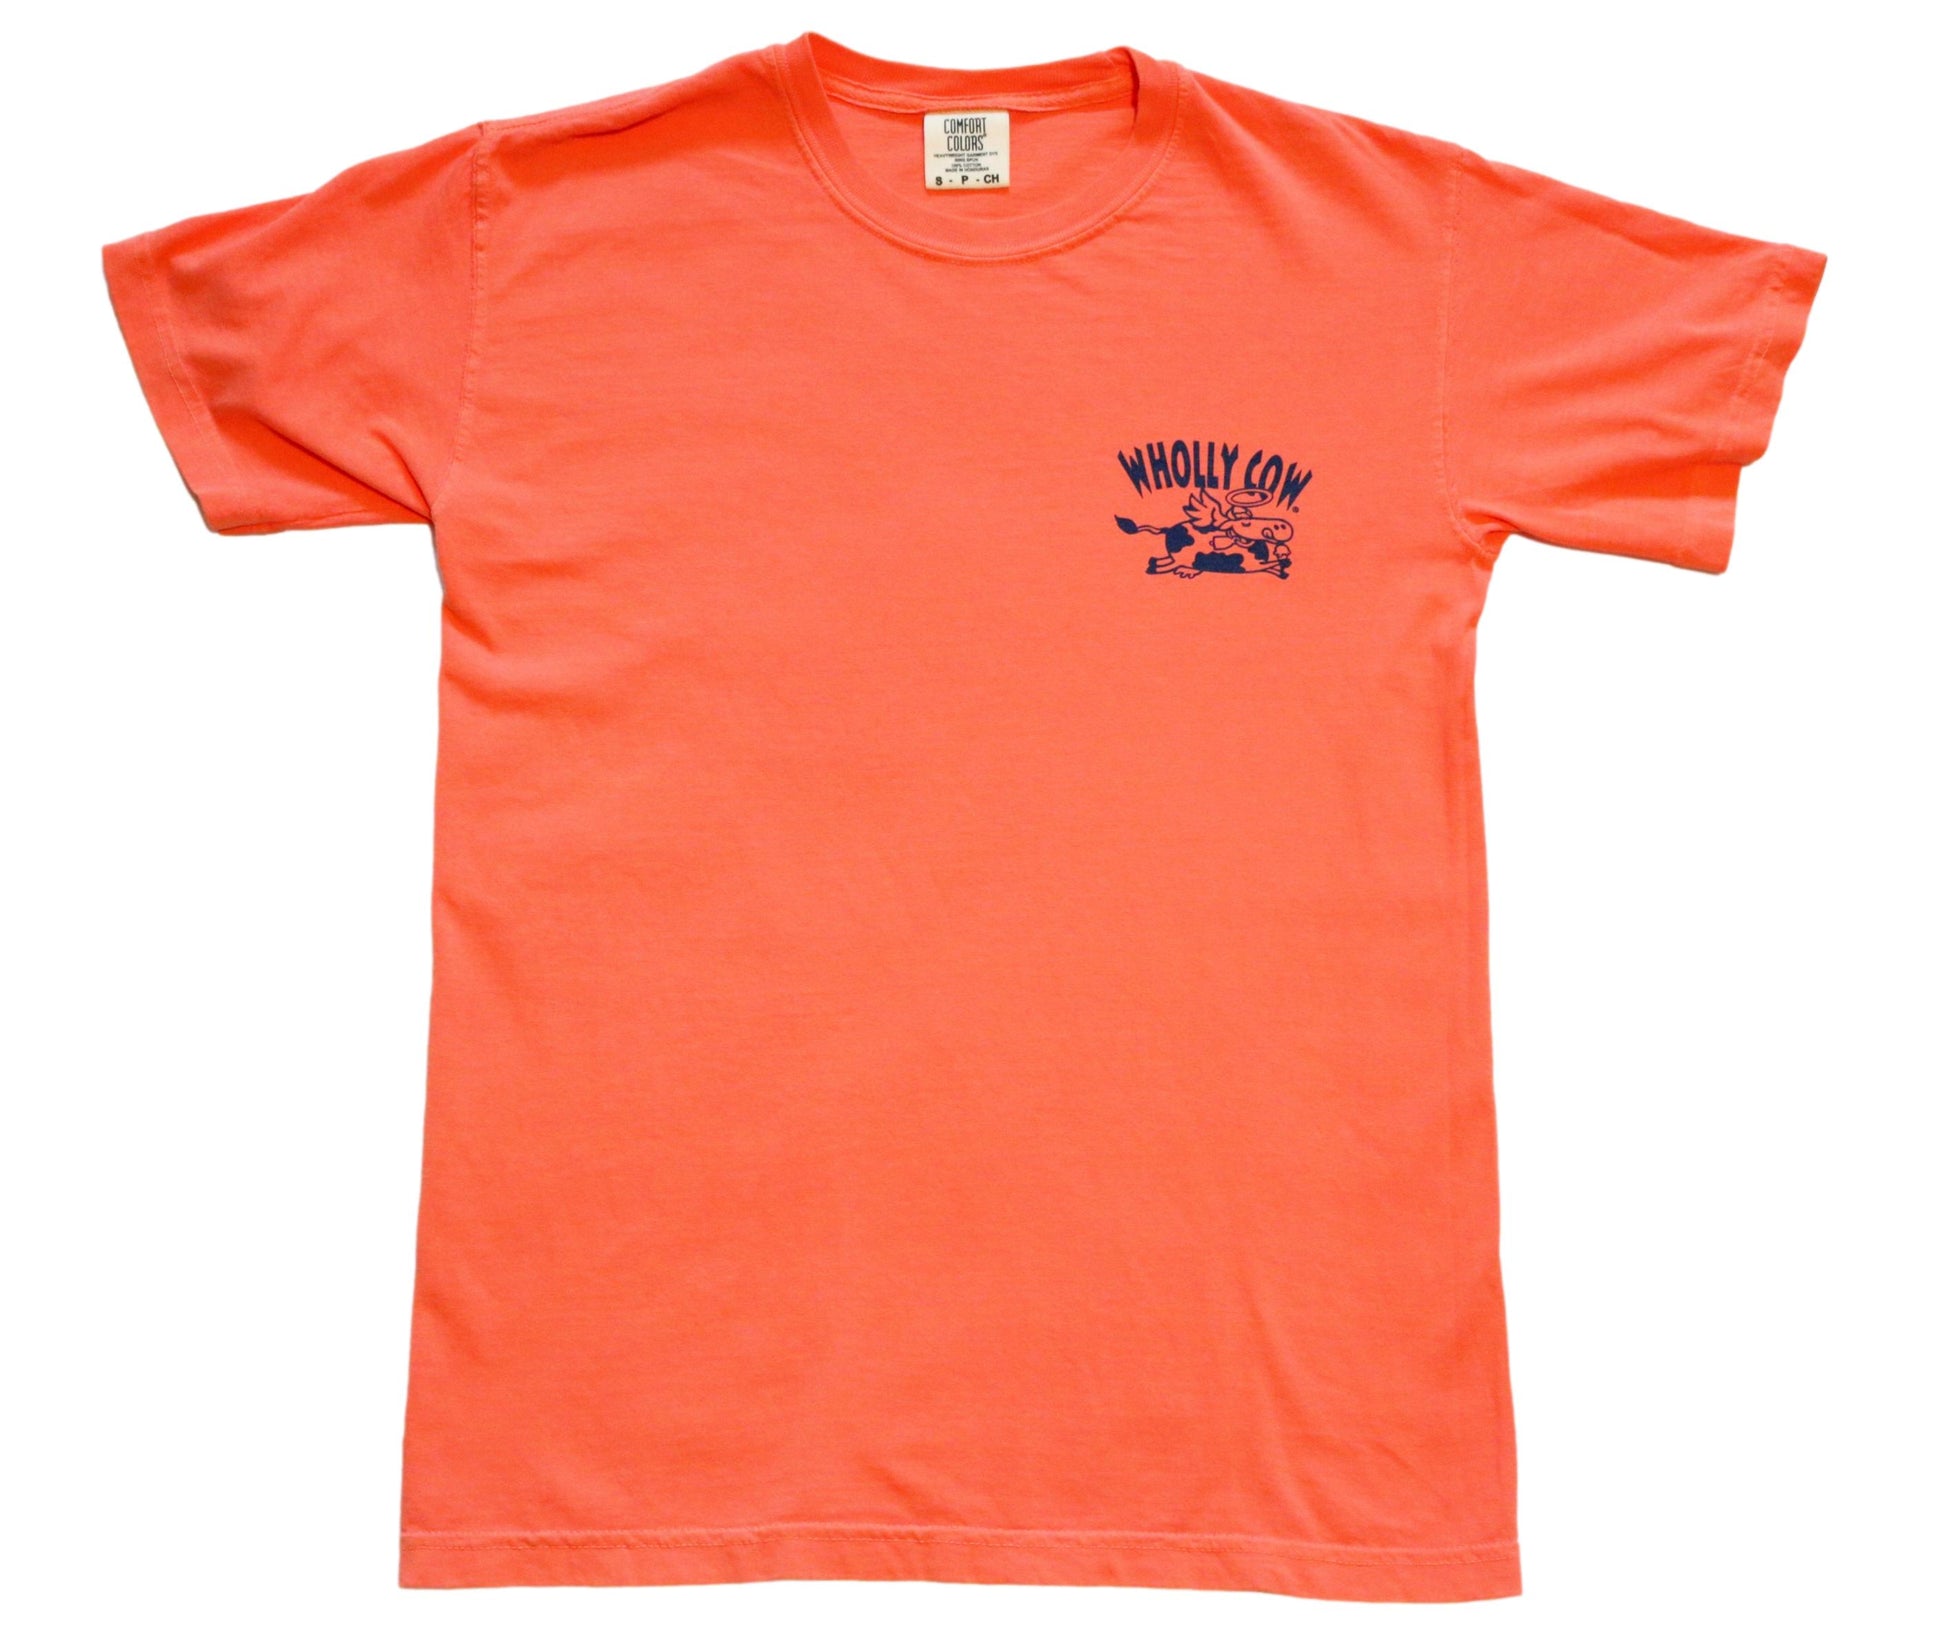 Wholly Cow Ice Cream Tshirt Coral